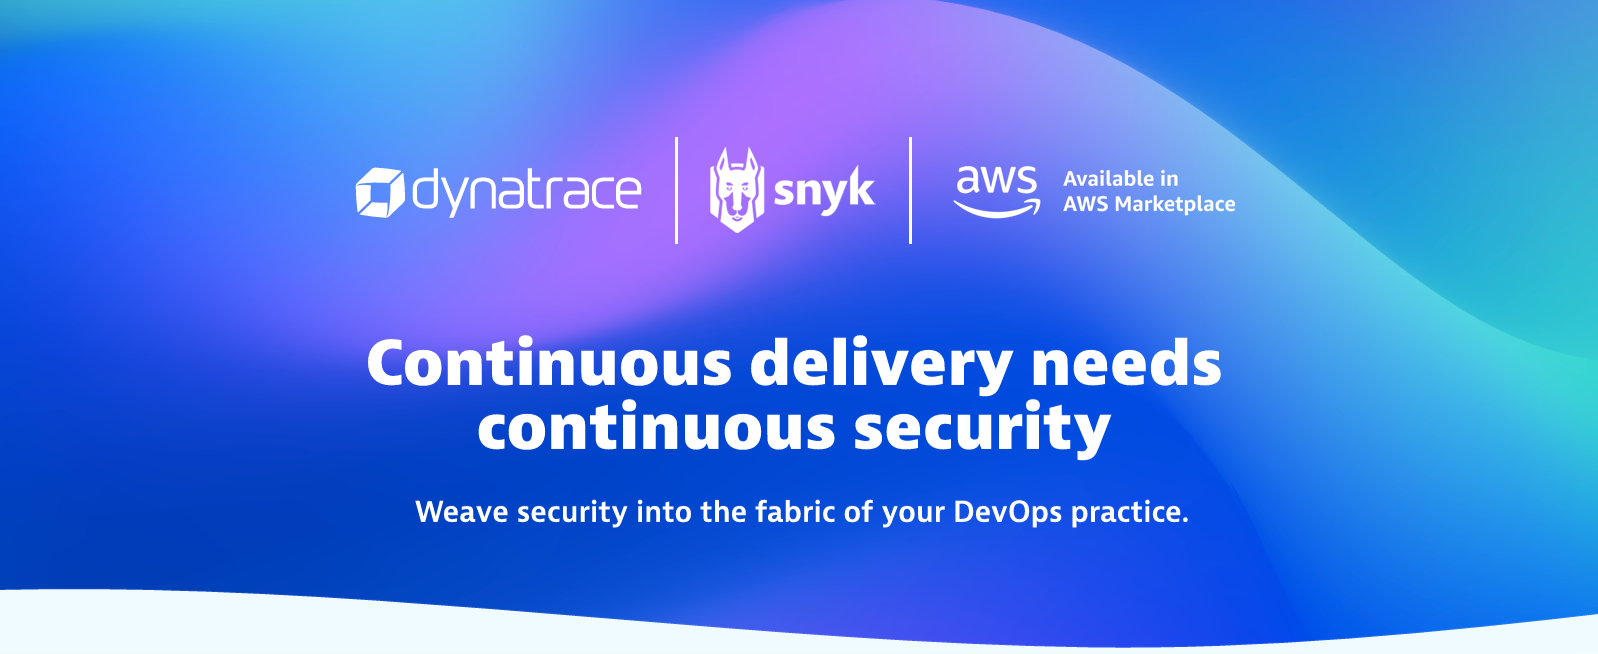 Continuous delivery needs continuous security banner